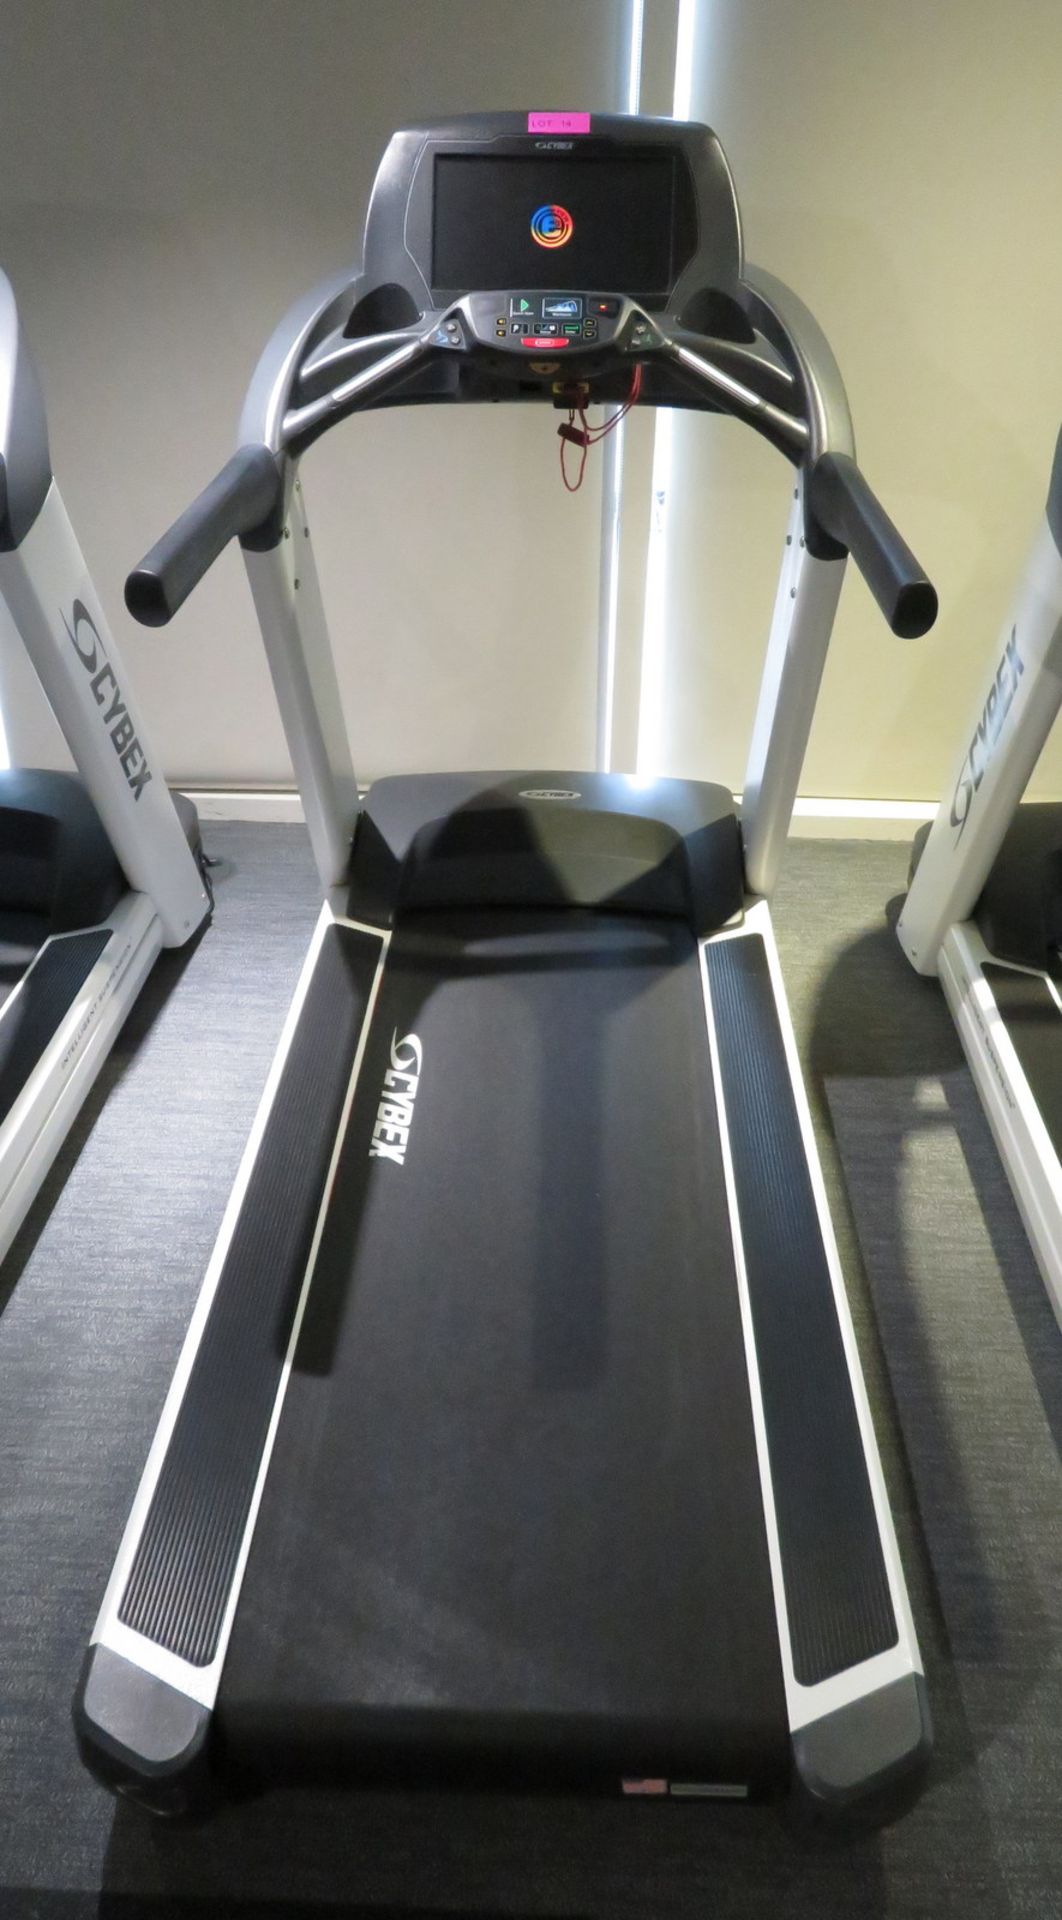 Cybex Treadmill Model: 625T, Working Condition With TV Display Monitor. - Image 2 of 9